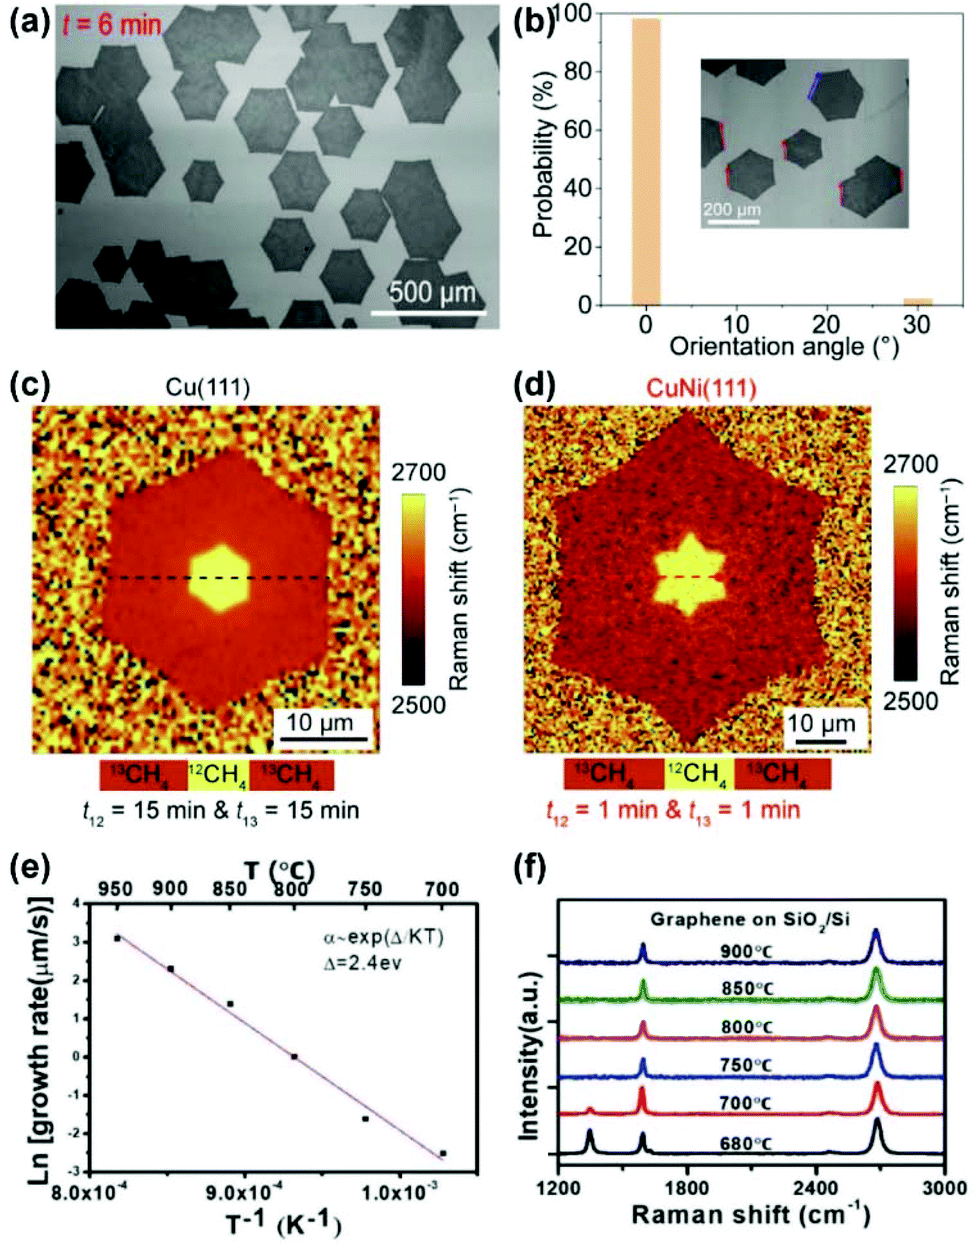 Preparation Of Single Crystal Metal Substrates For The Growth Of High Quality Two Dimensional Materials Inorganic Chemistry Frontiers Rsc Publishing